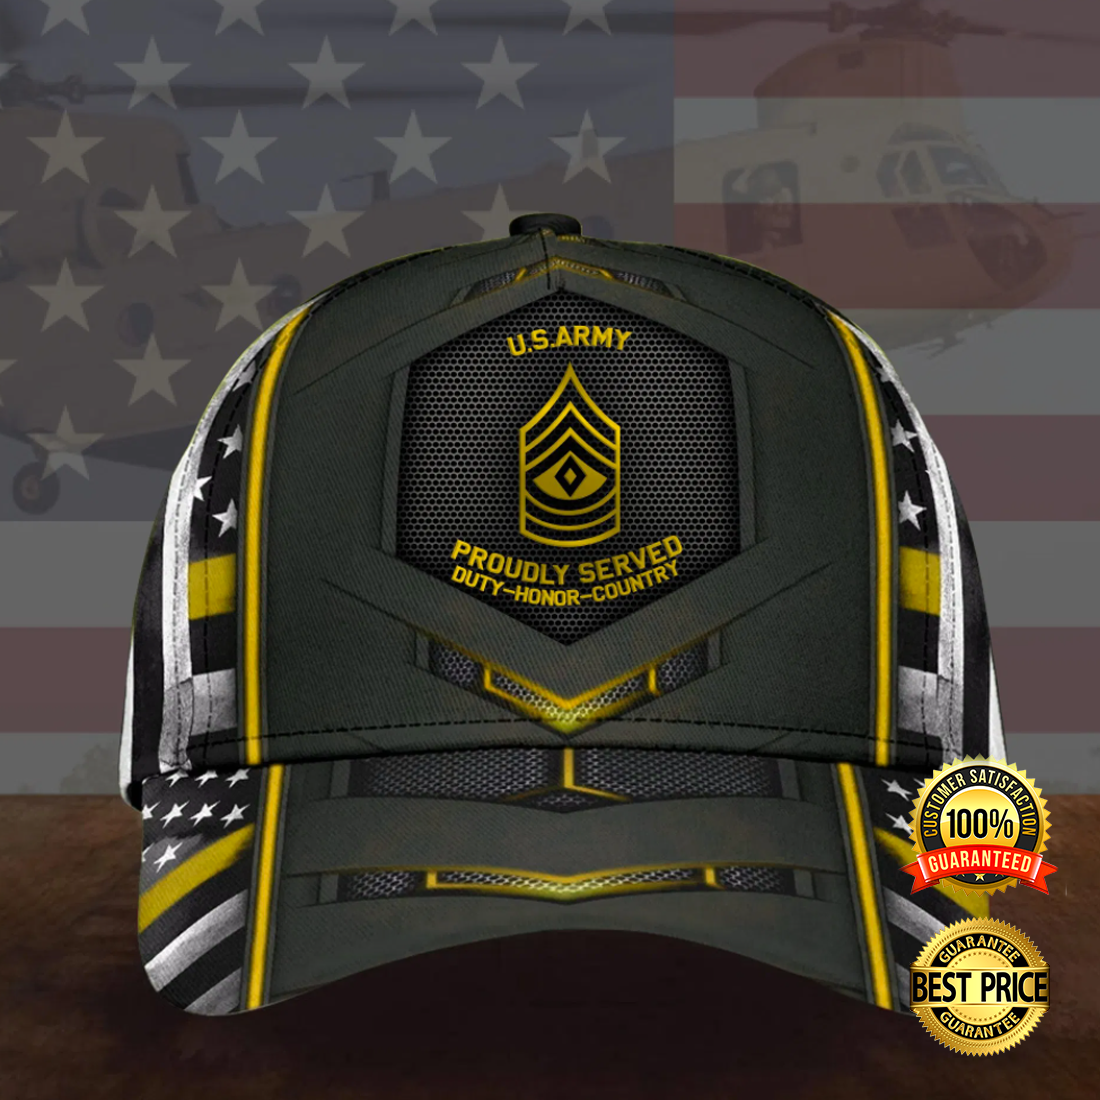 US army proudly served duty honor country cap